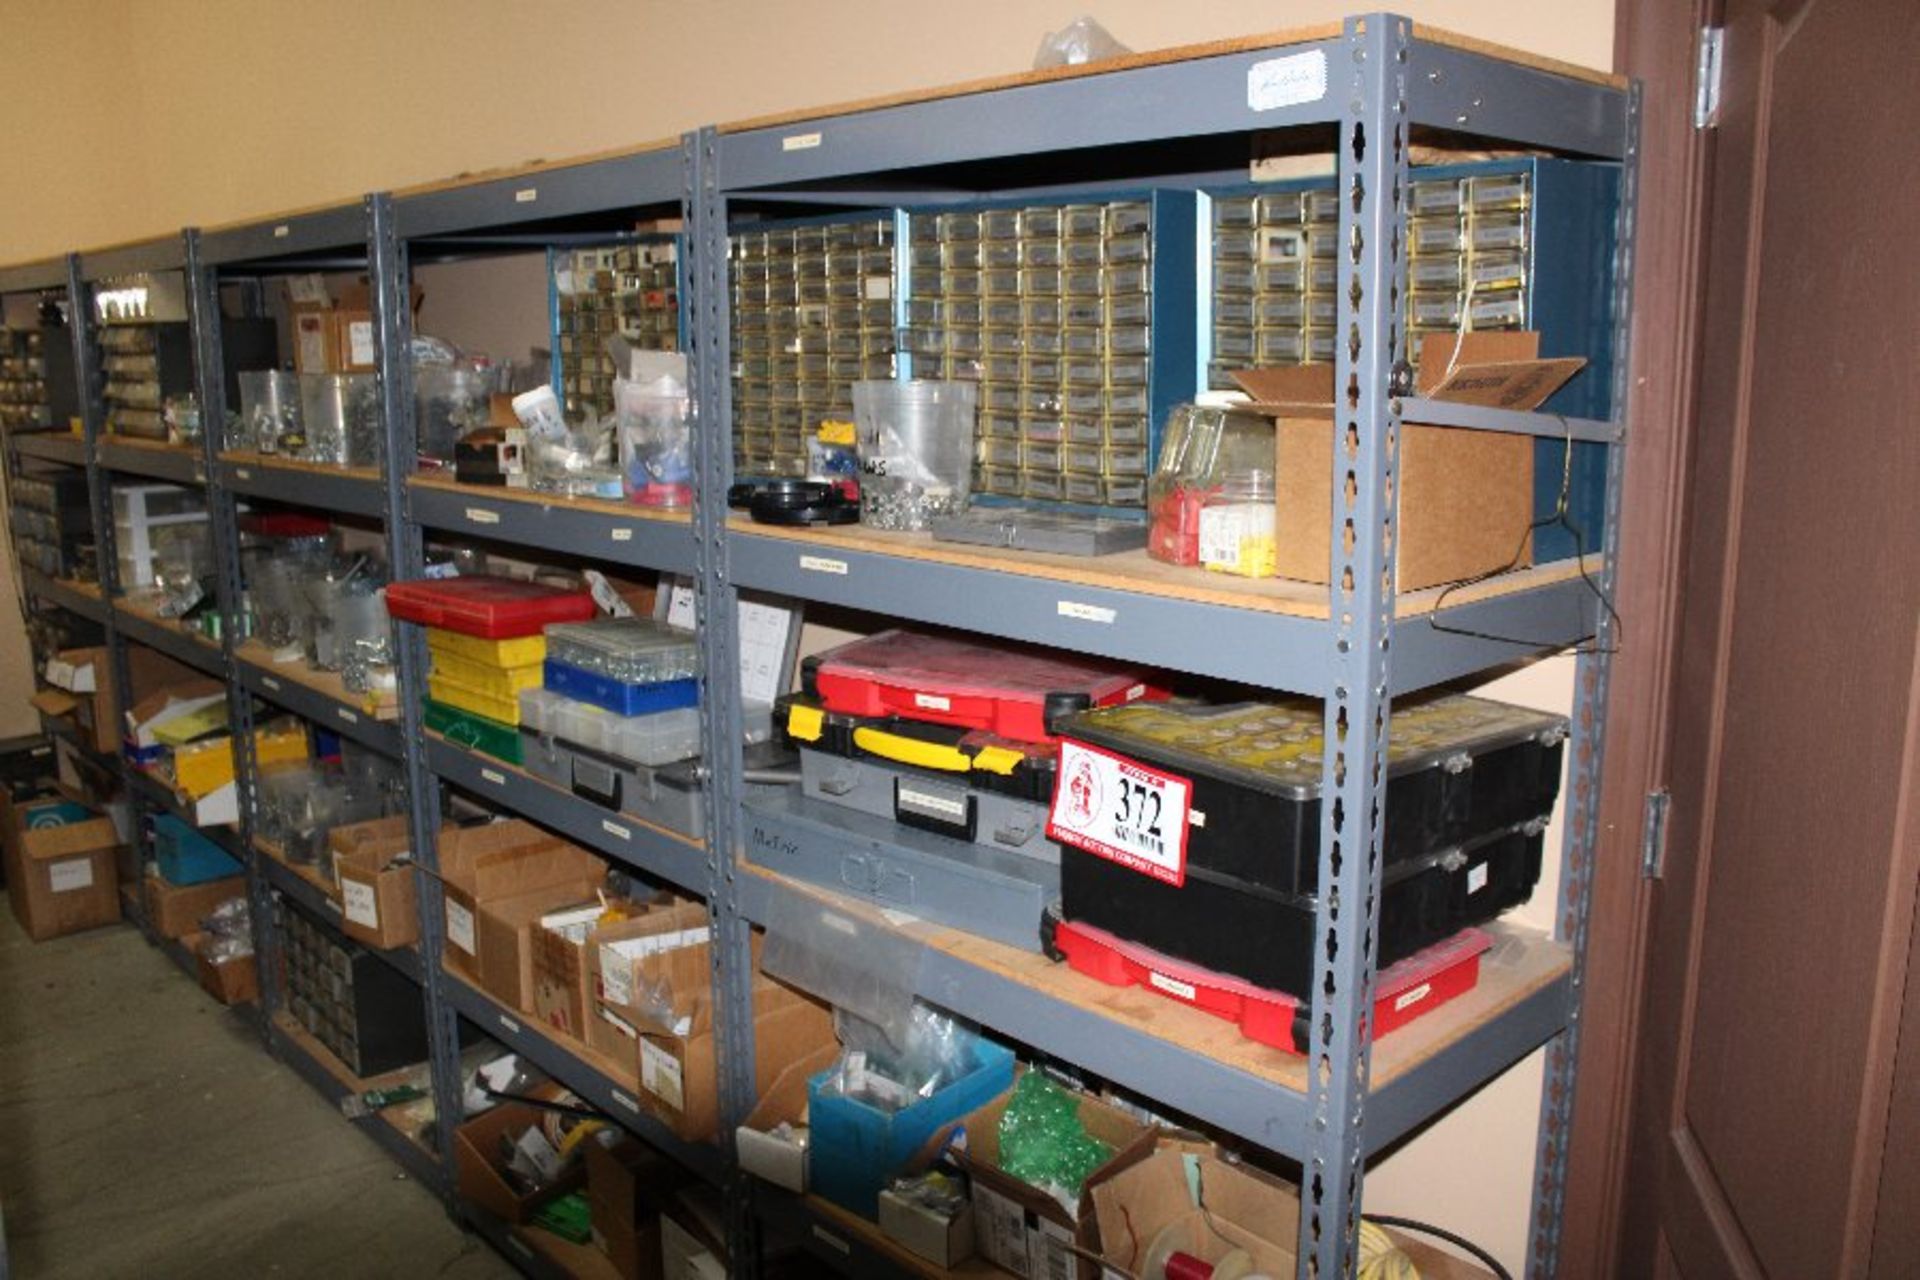 Contents of (5) Sections of Metal Shelving: Bolts, Screws, Wing Bolts, Electrical Parts, Components,